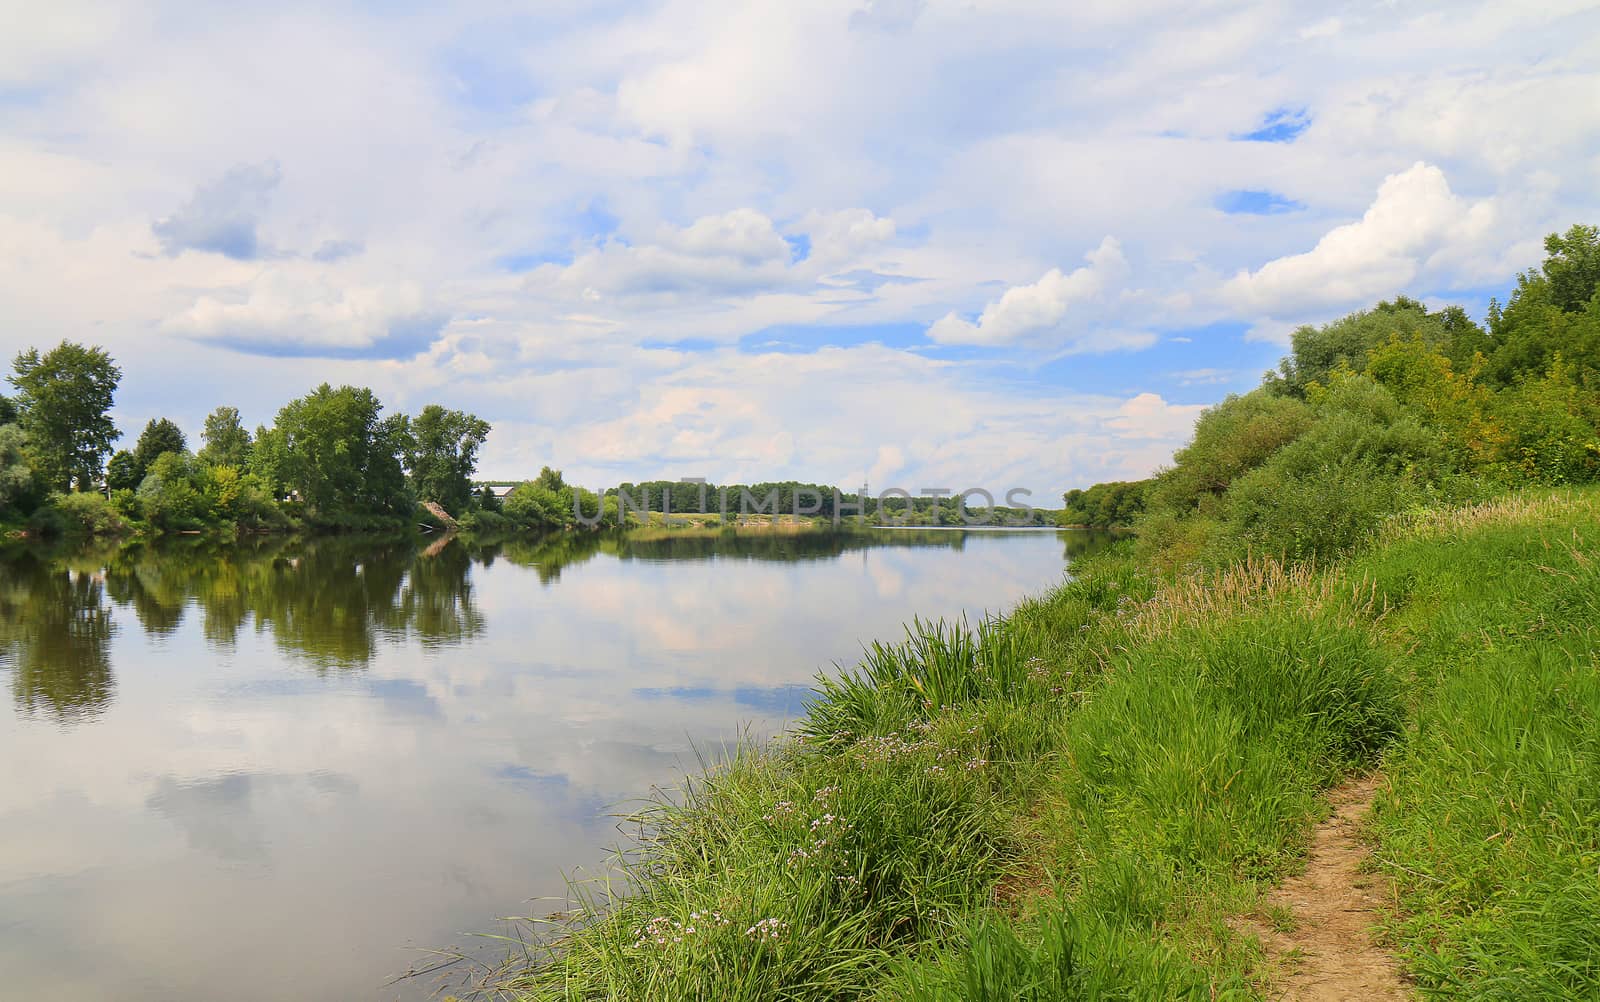 russia River Kliazma and its banks, Sky is cloudy.